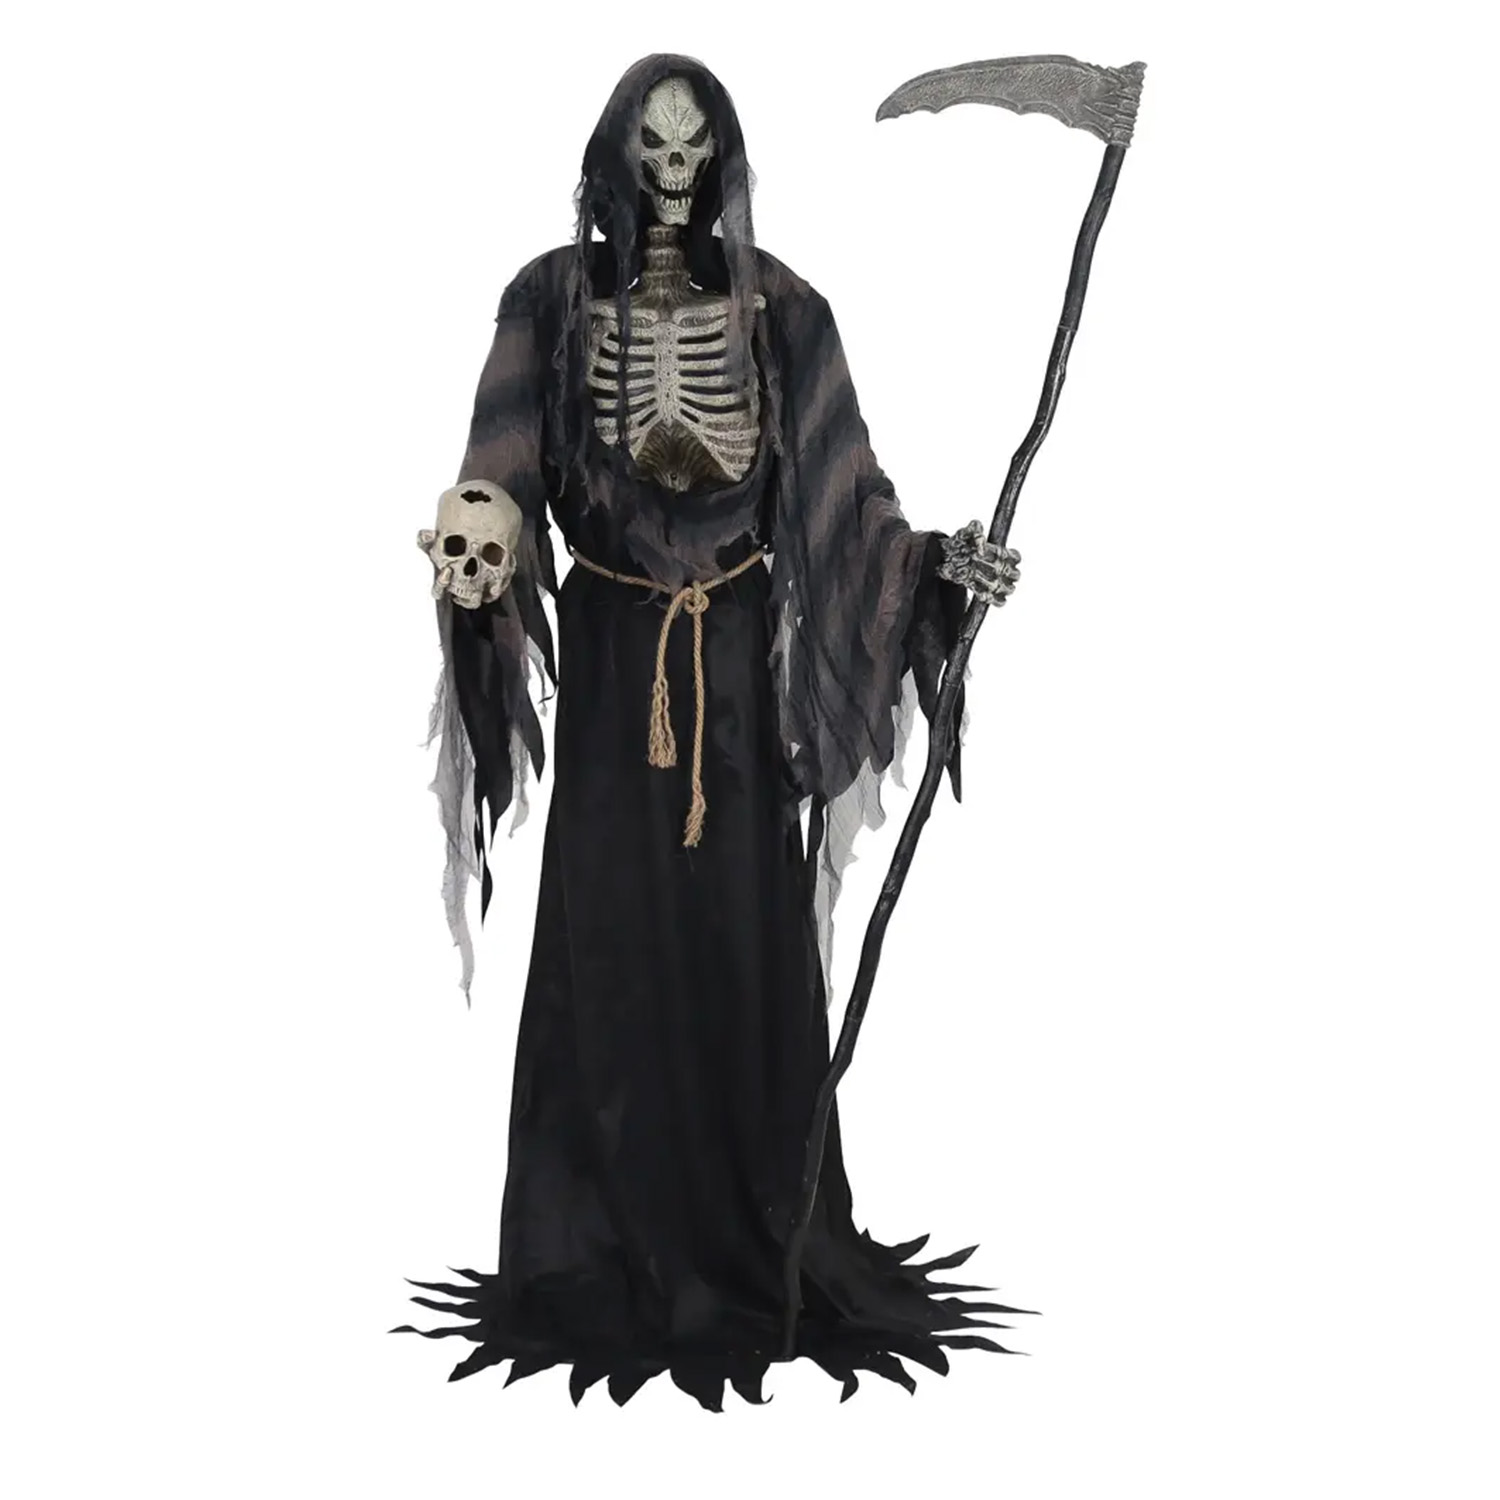 Rotting Reaper Animated Halloween Prop